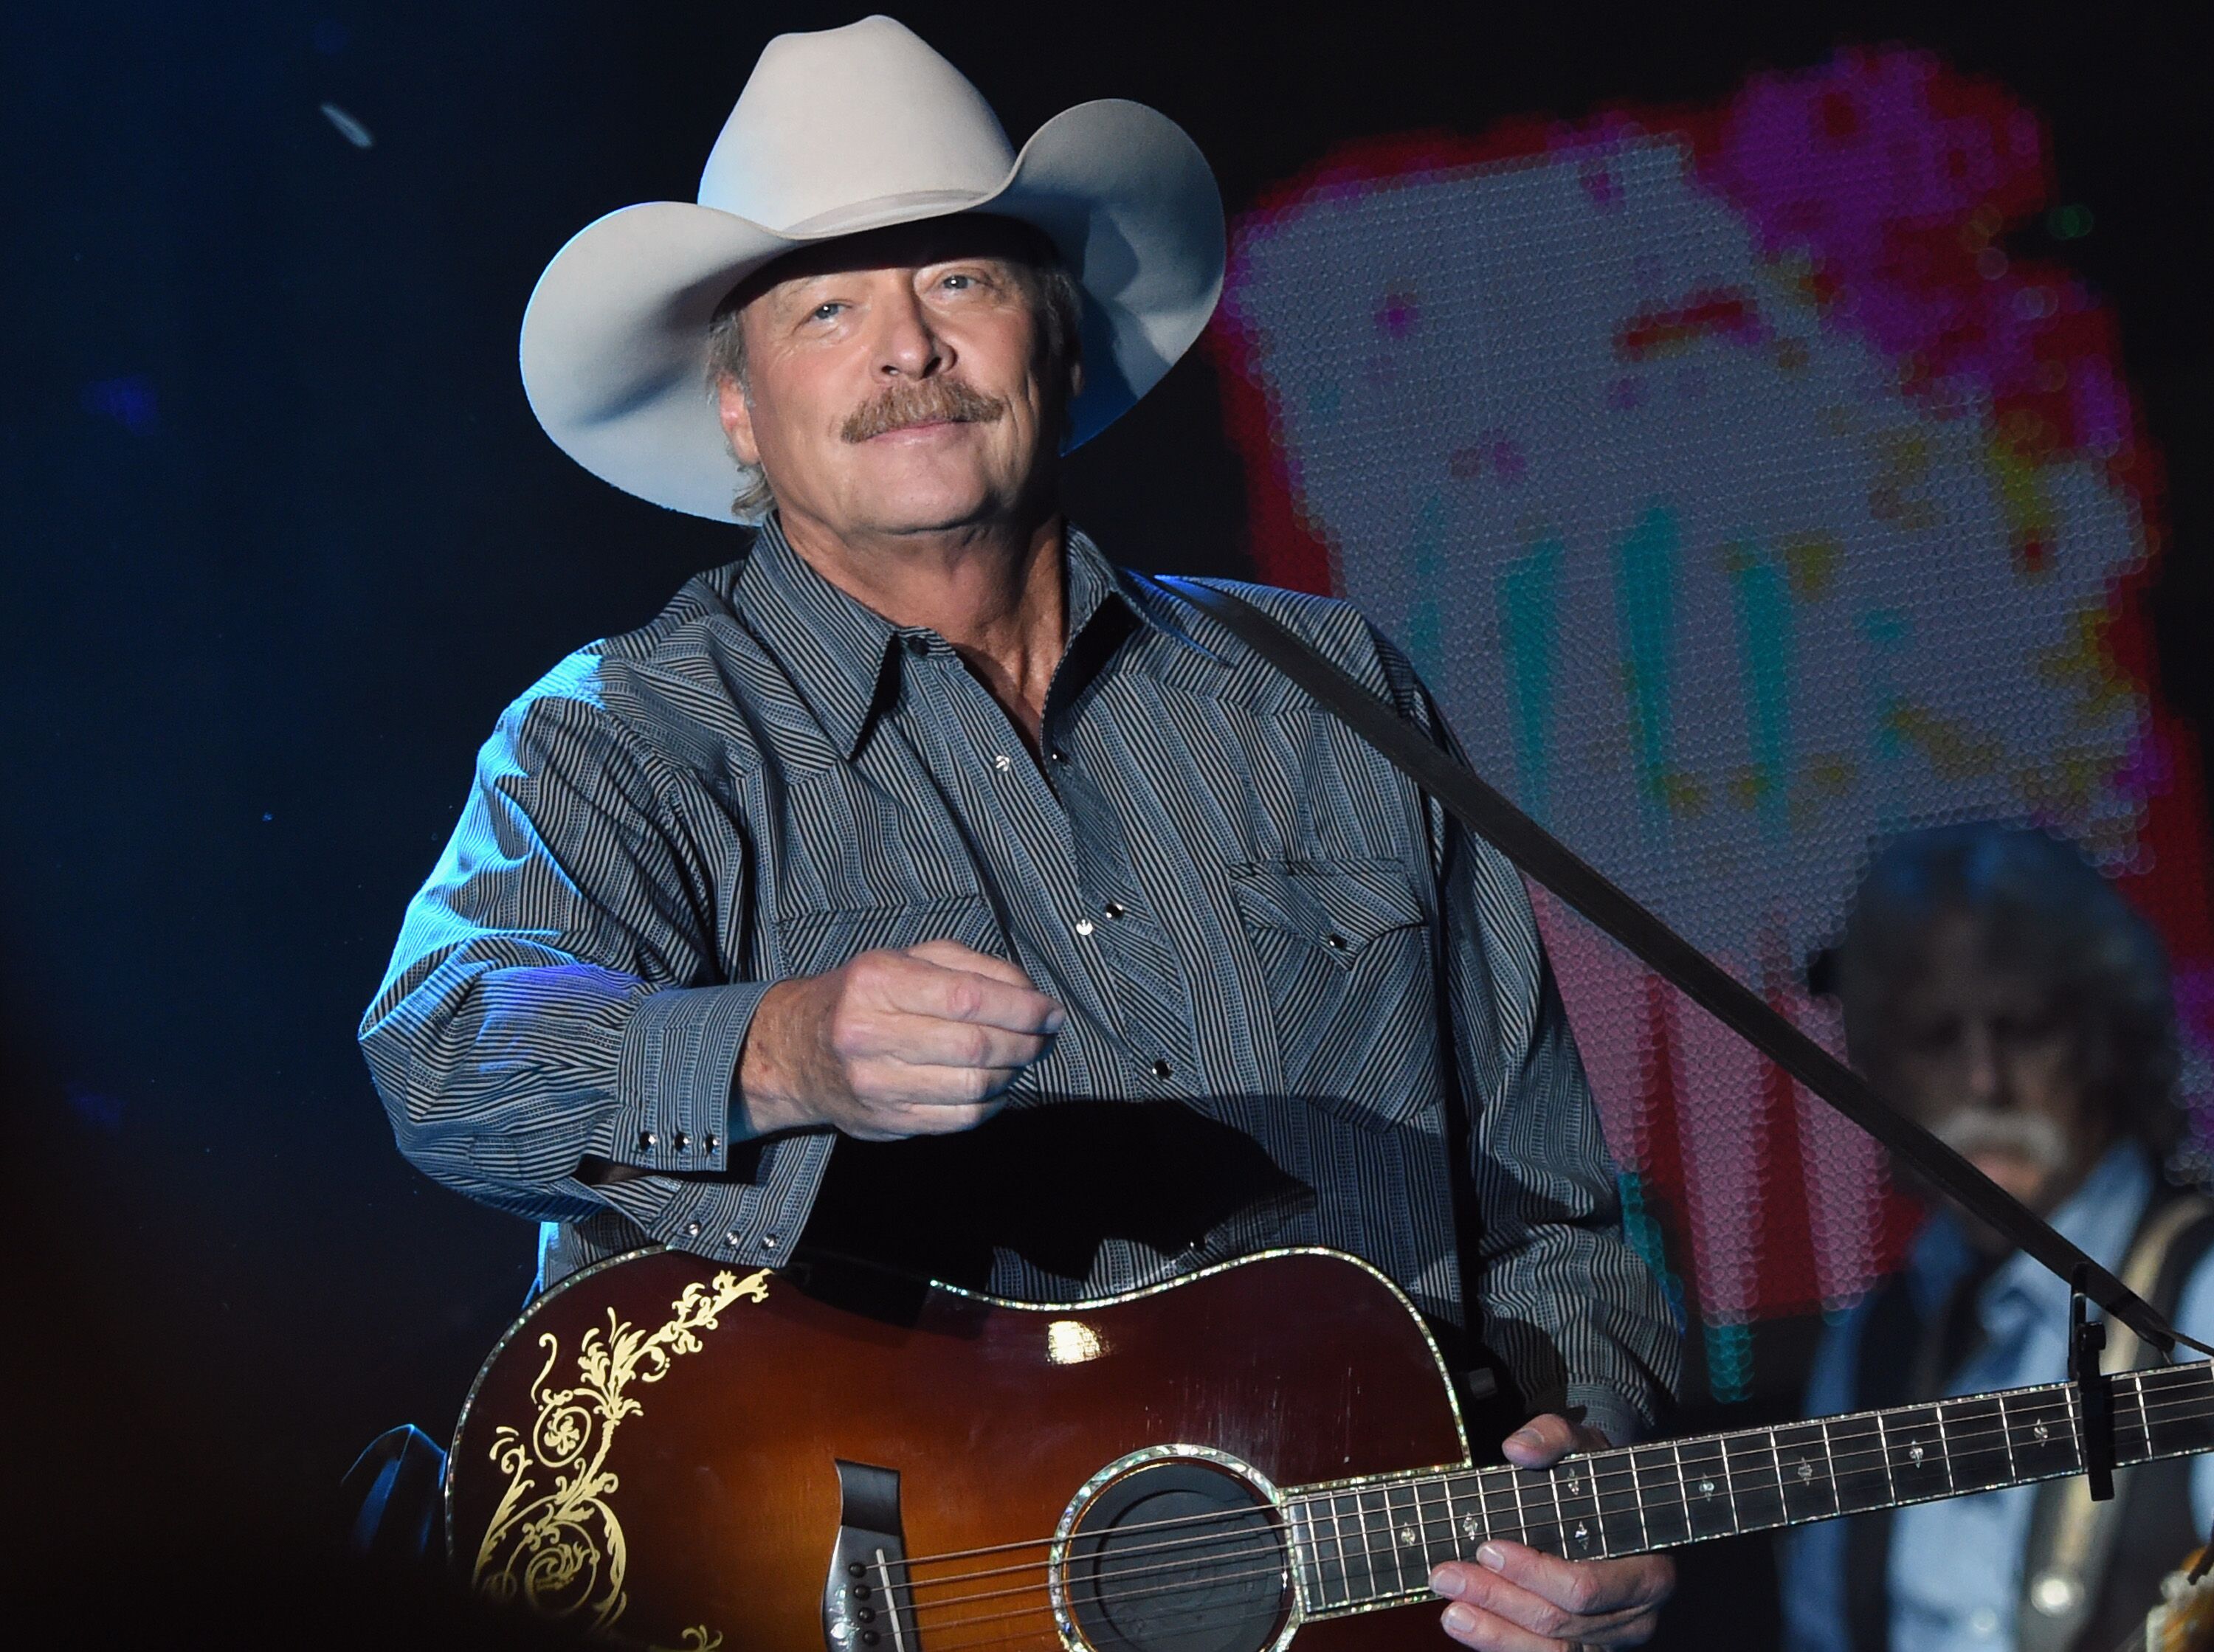 Alan Jackson performs at Tree Town Music Festival - Day 3 on May 27, 2017 in Heritage Park, Forest City, Iowa. | Source: Getty Images